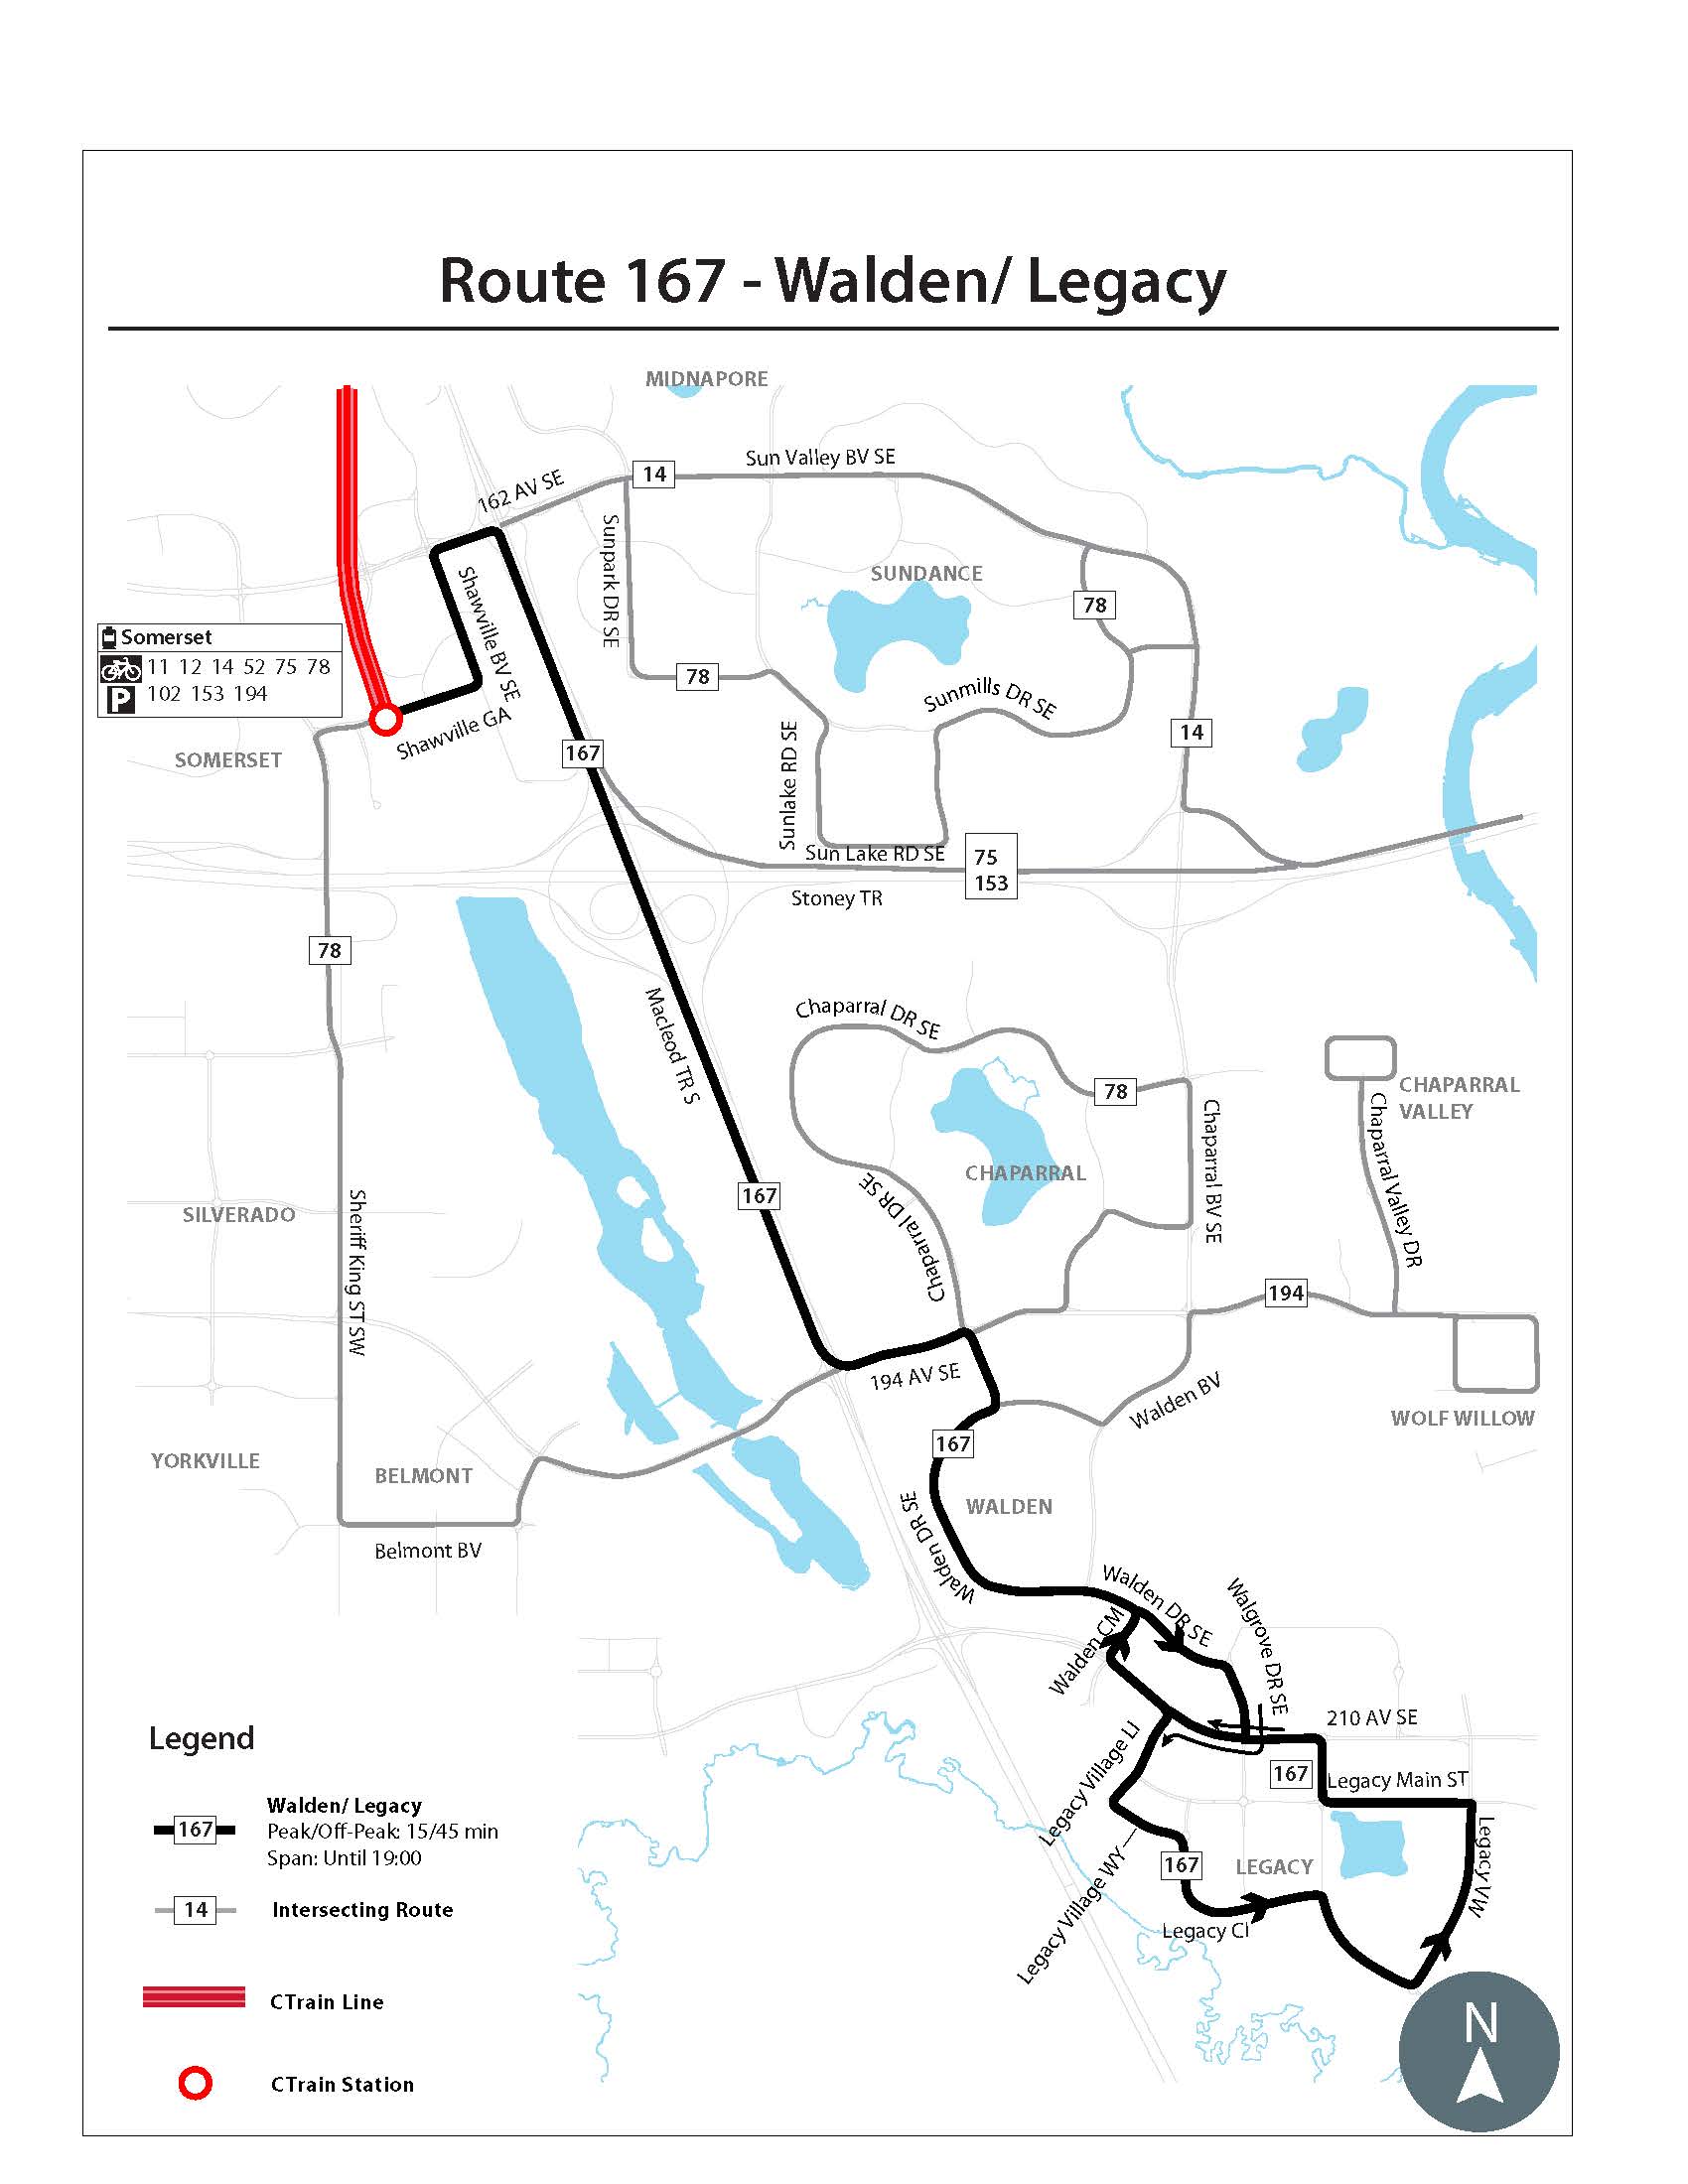 Route 167 route changes 2022